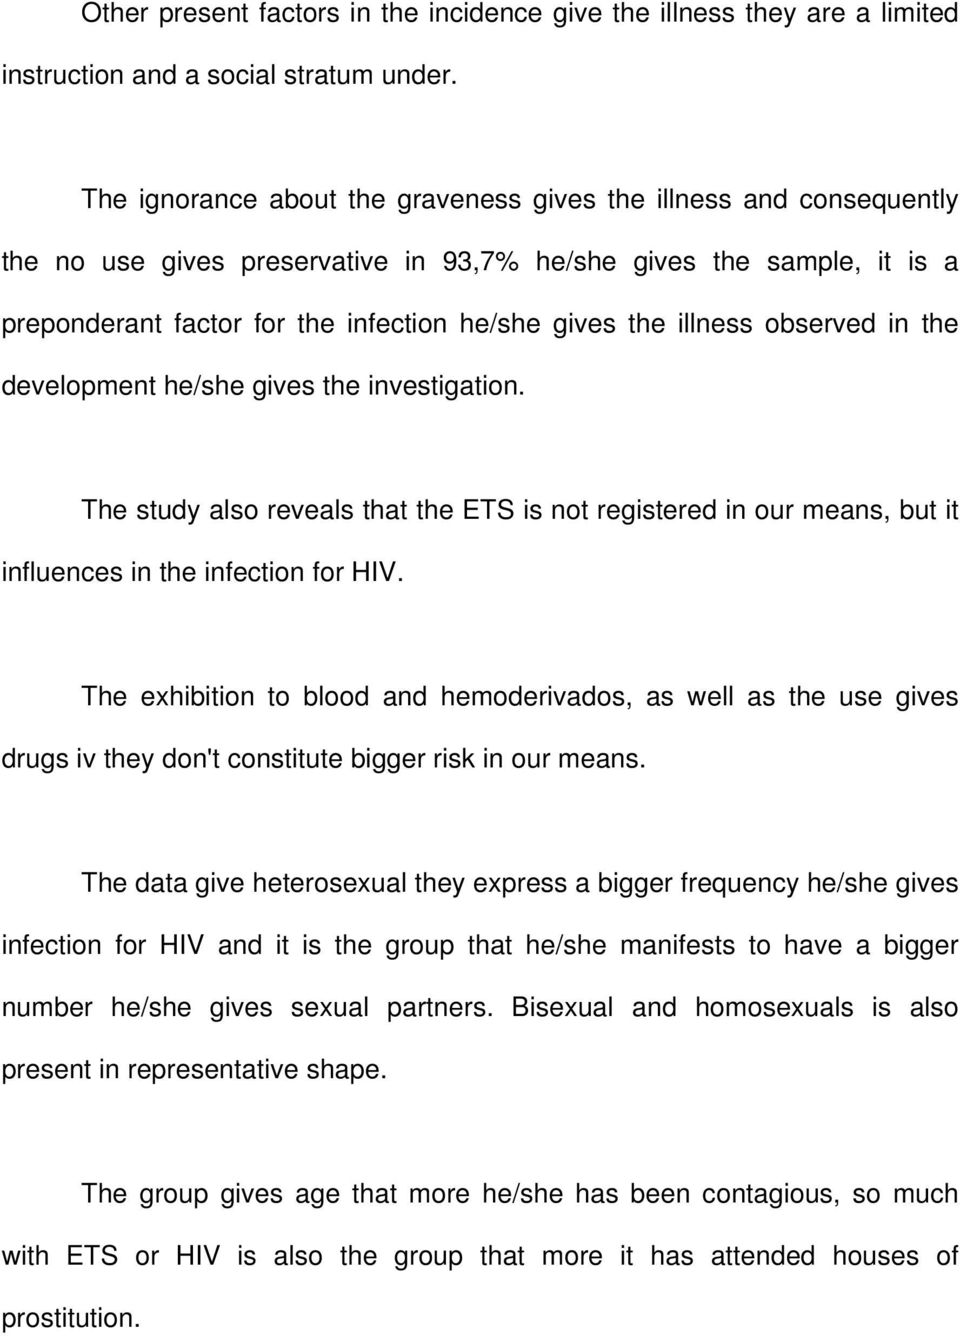 illness observed in the development he/she gives the investigation. The study also reveals that the ETS is not registered in our means, but it influences in the infection for HIV.